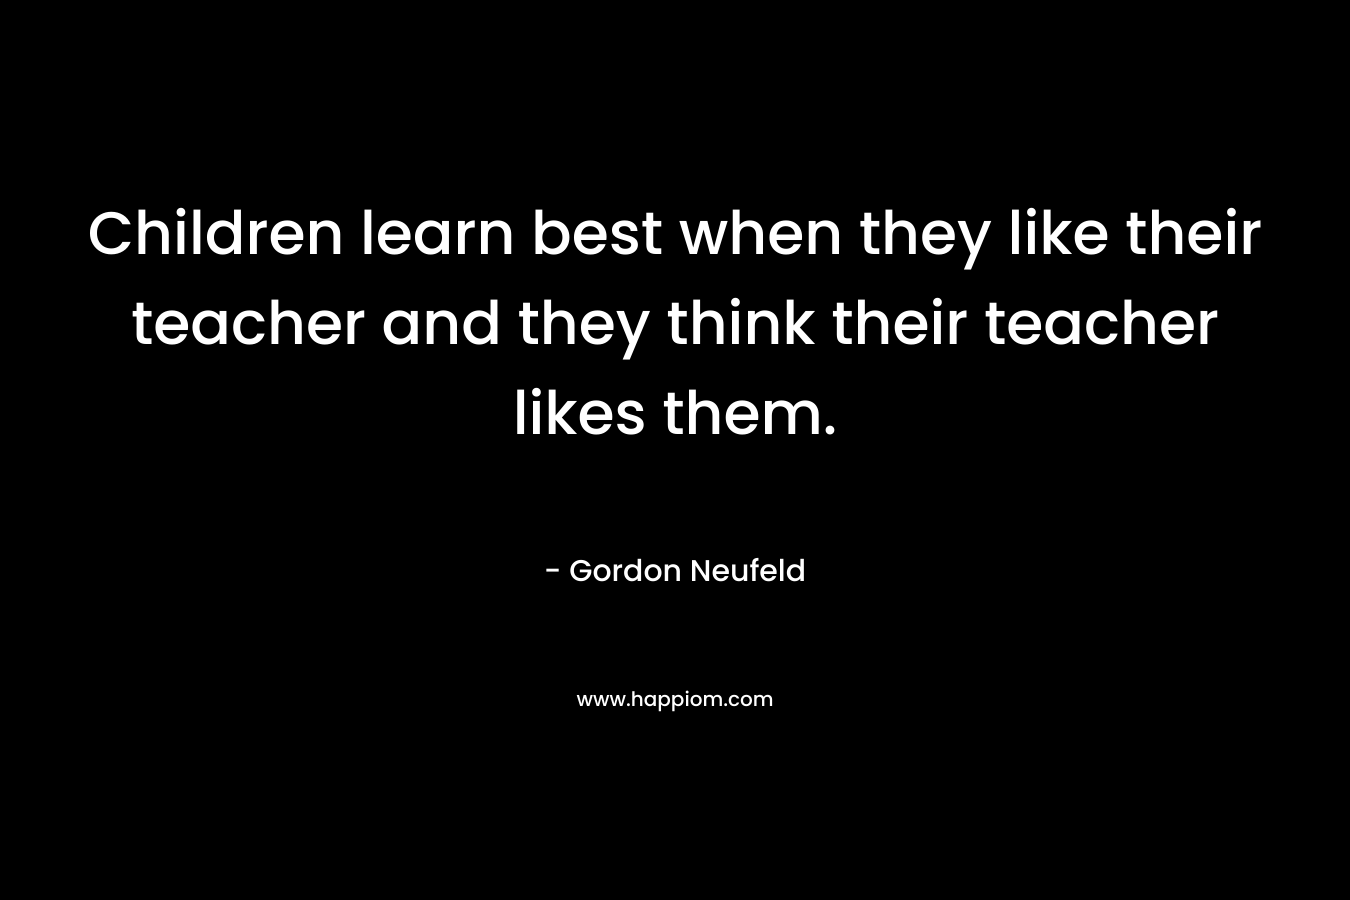 Children learn best when they like their teacher and they think their teacher likes them.